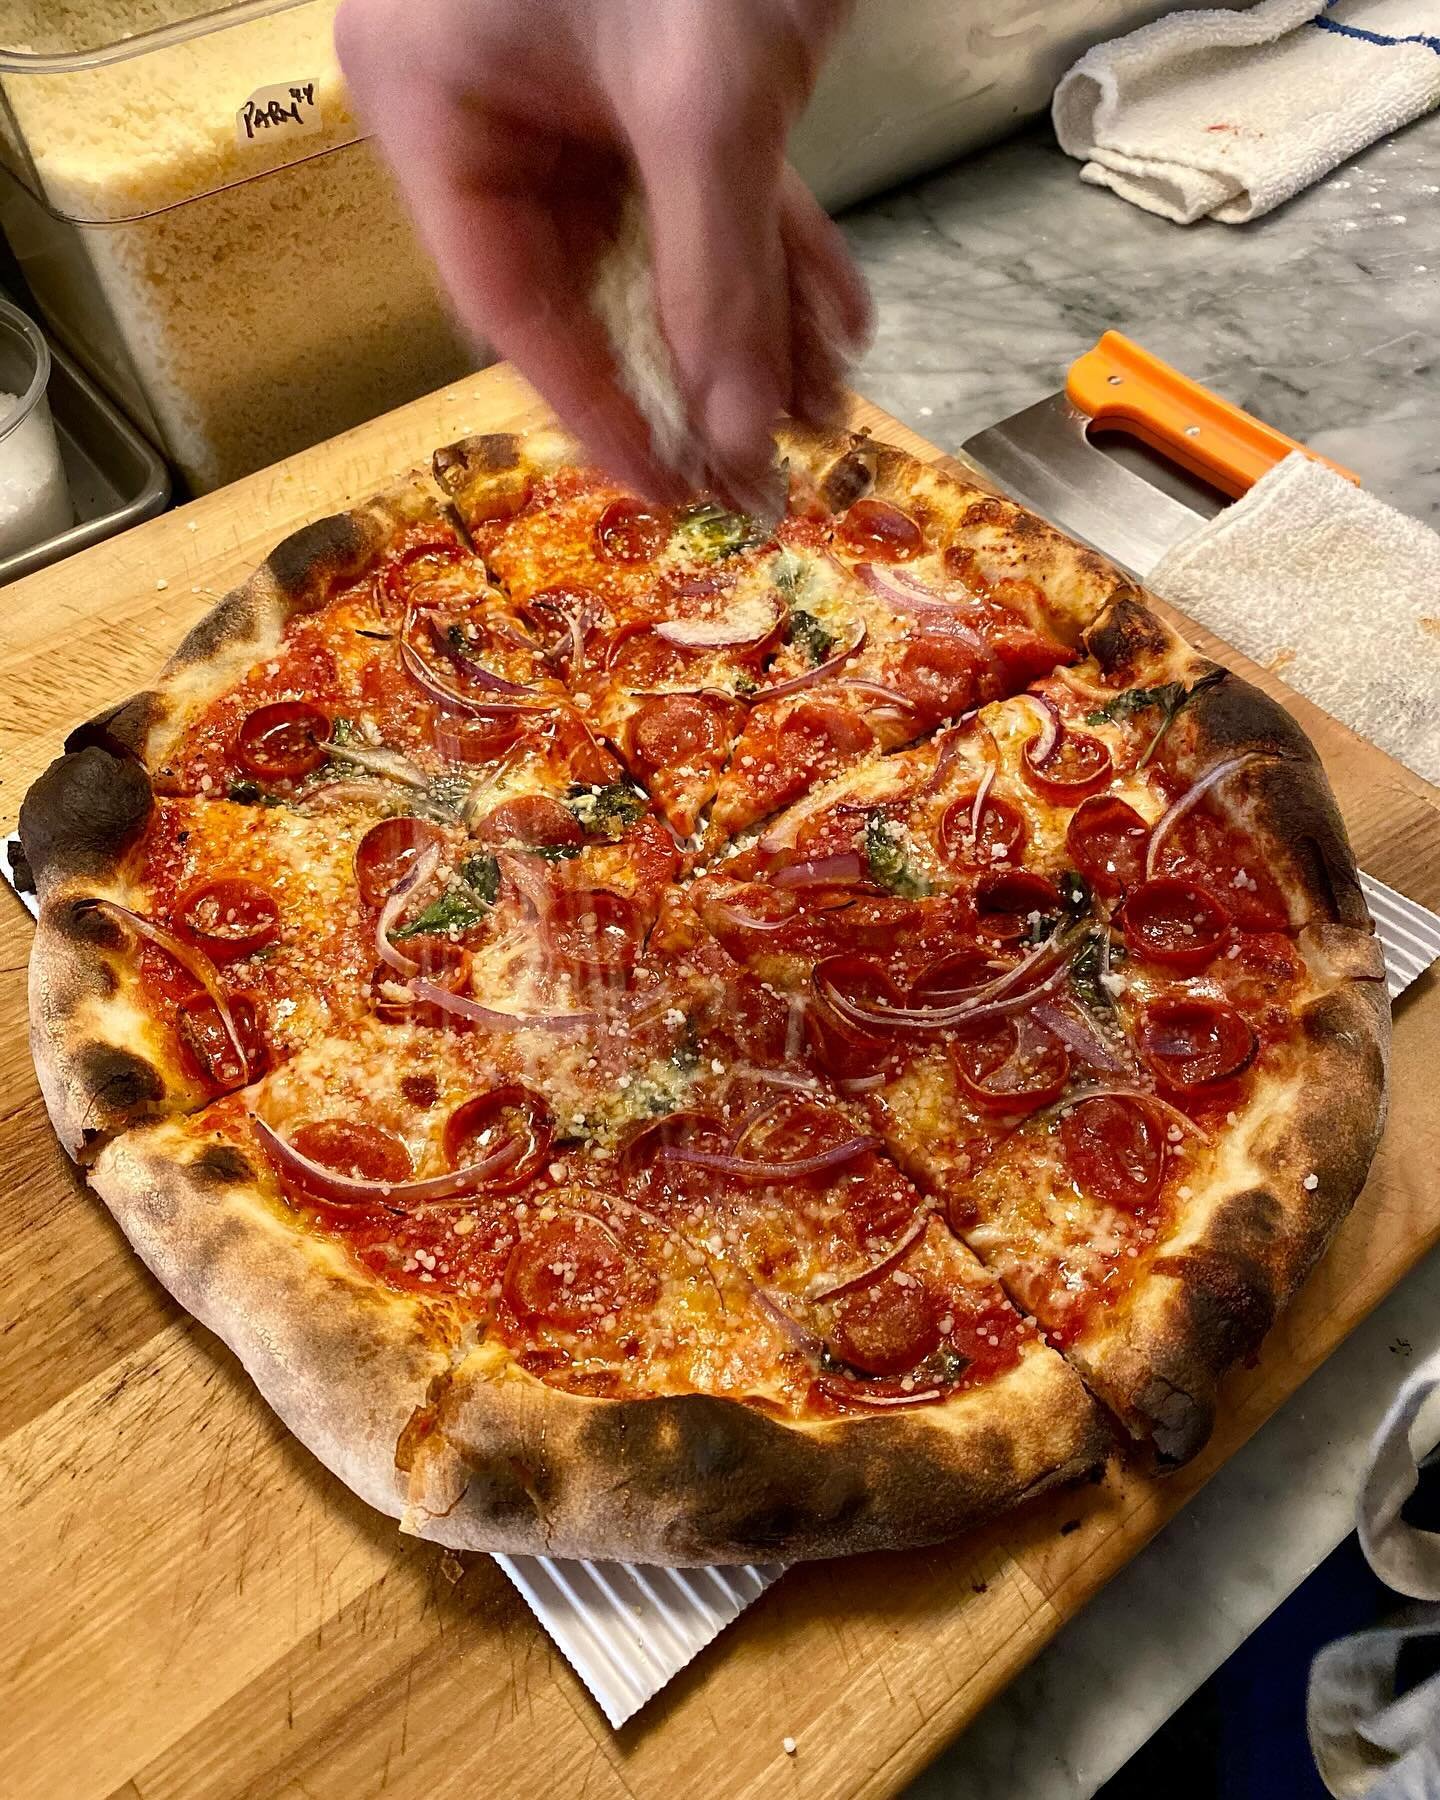 Happy Wednesday!

Here&rsquo;s a pic of a Margherita with peps and onions to get you through the work day.